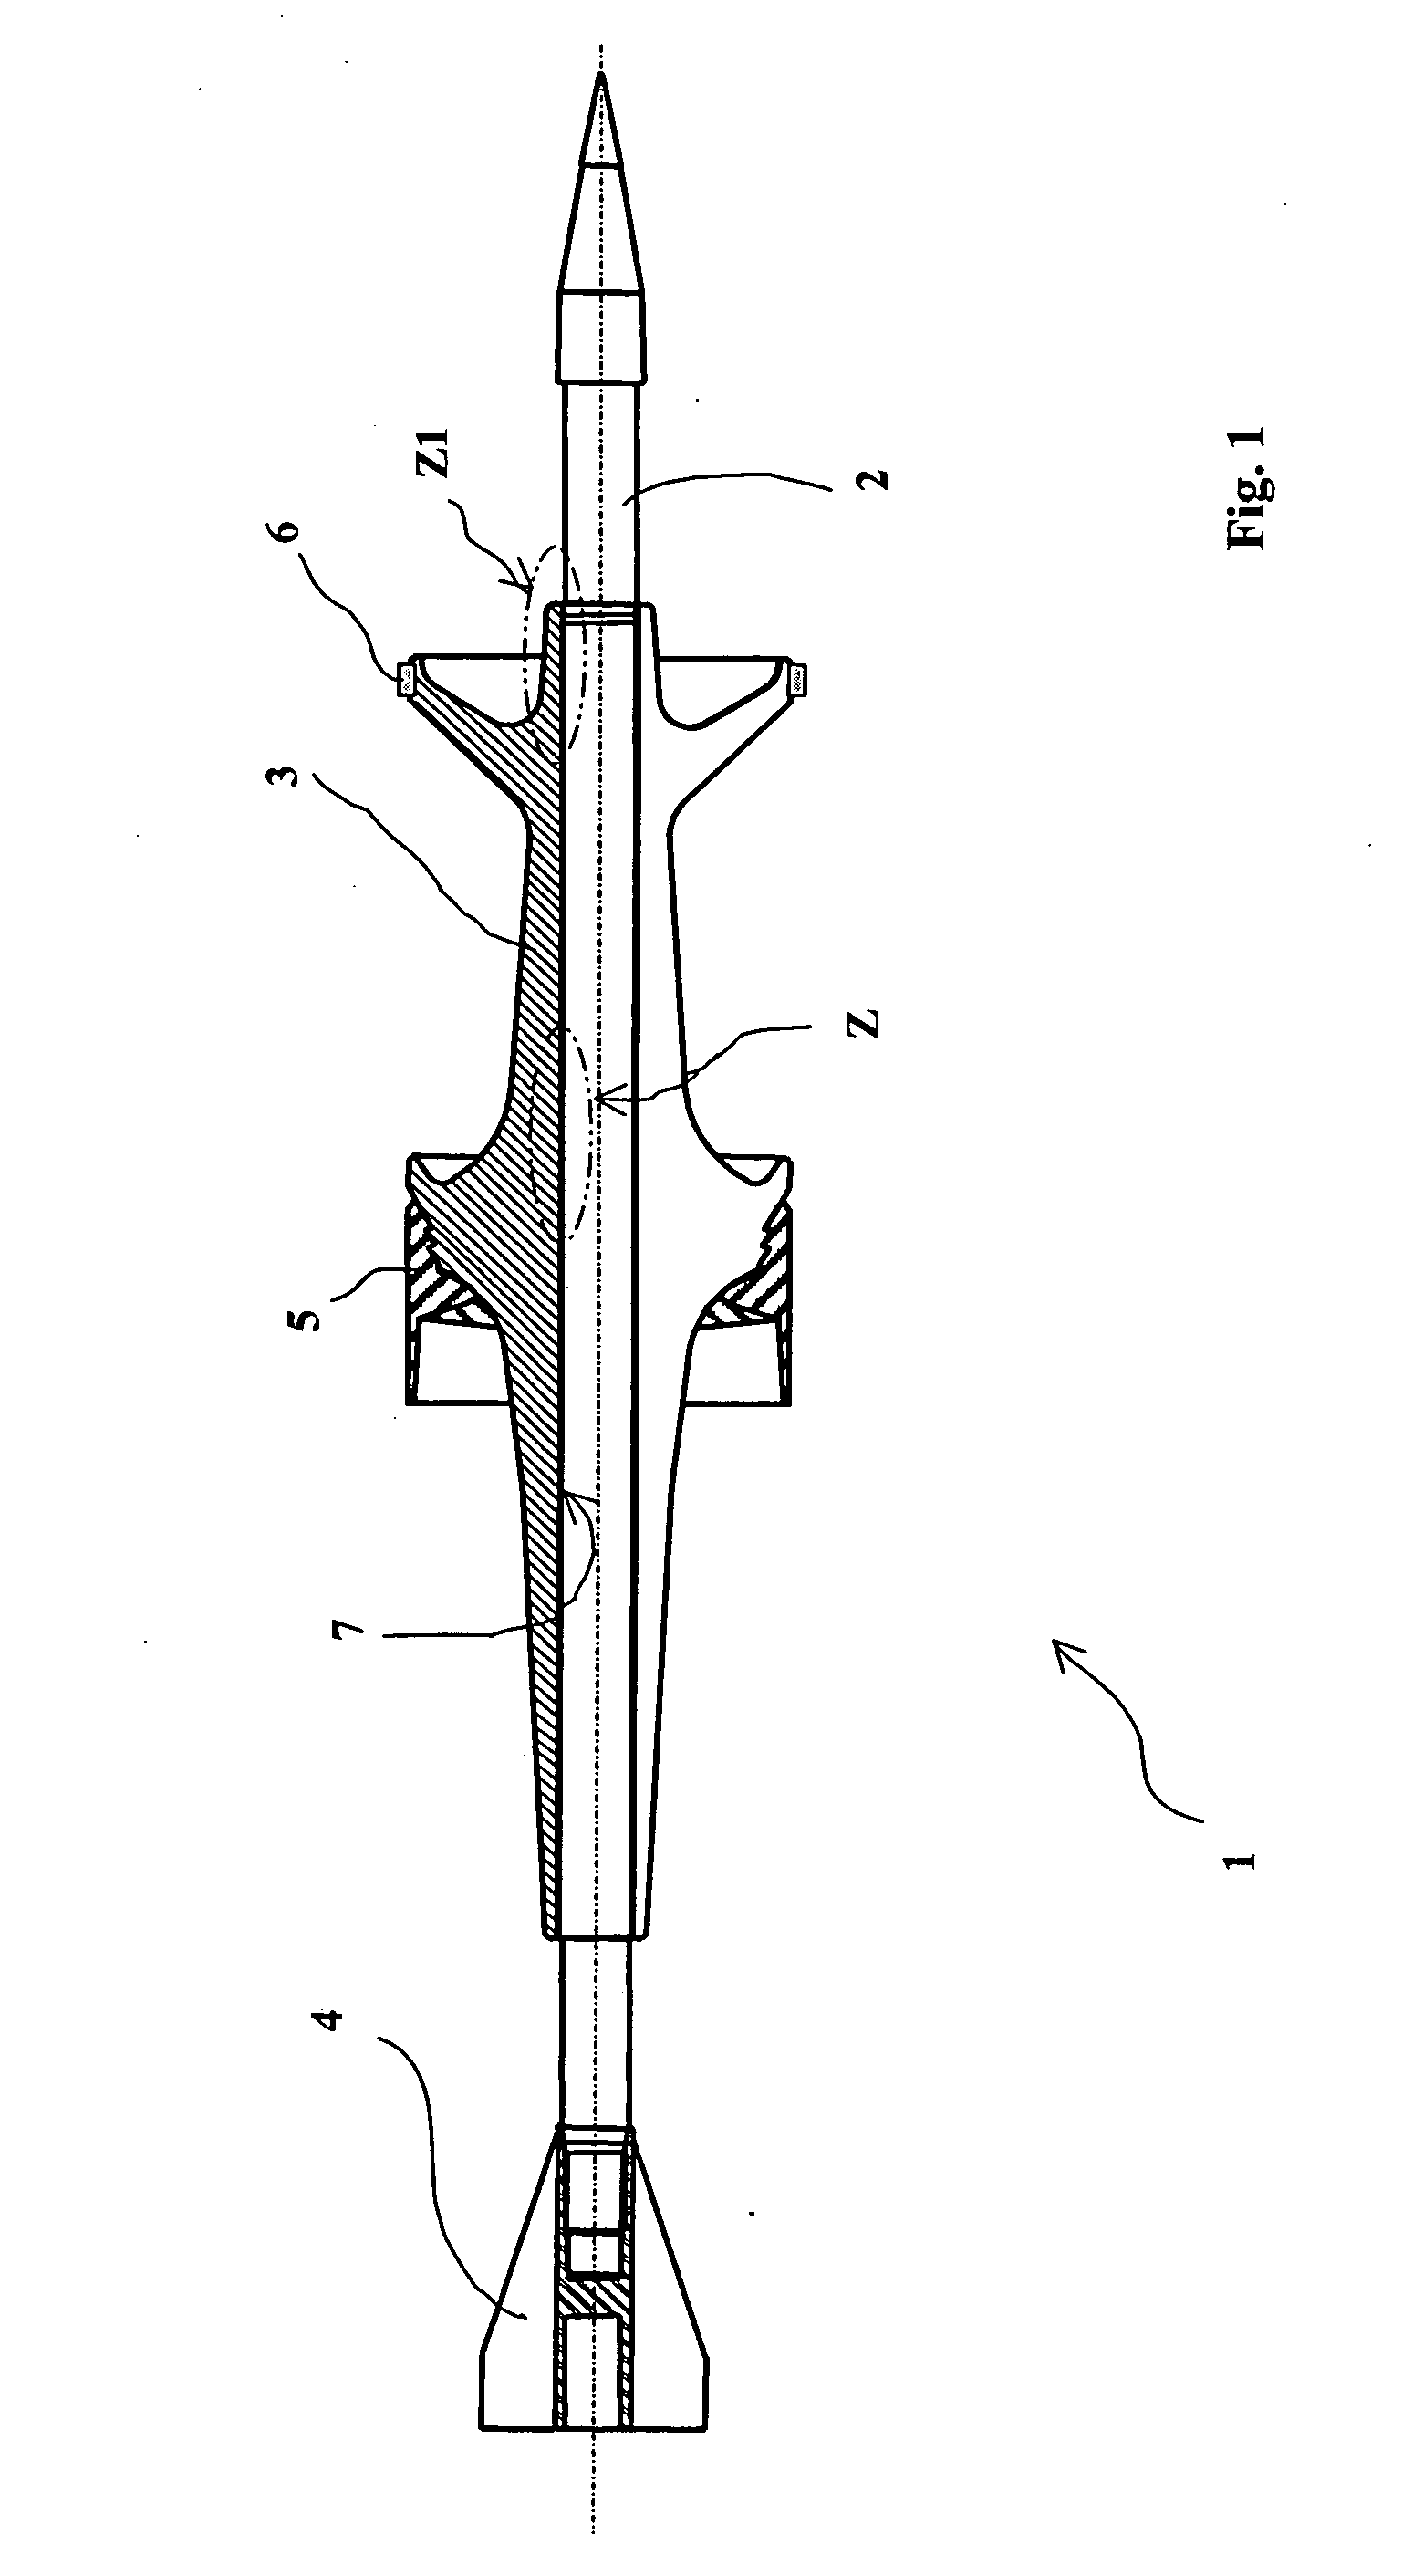 Sub-caliber projectile, penetrator and sabot enabling such a projectile